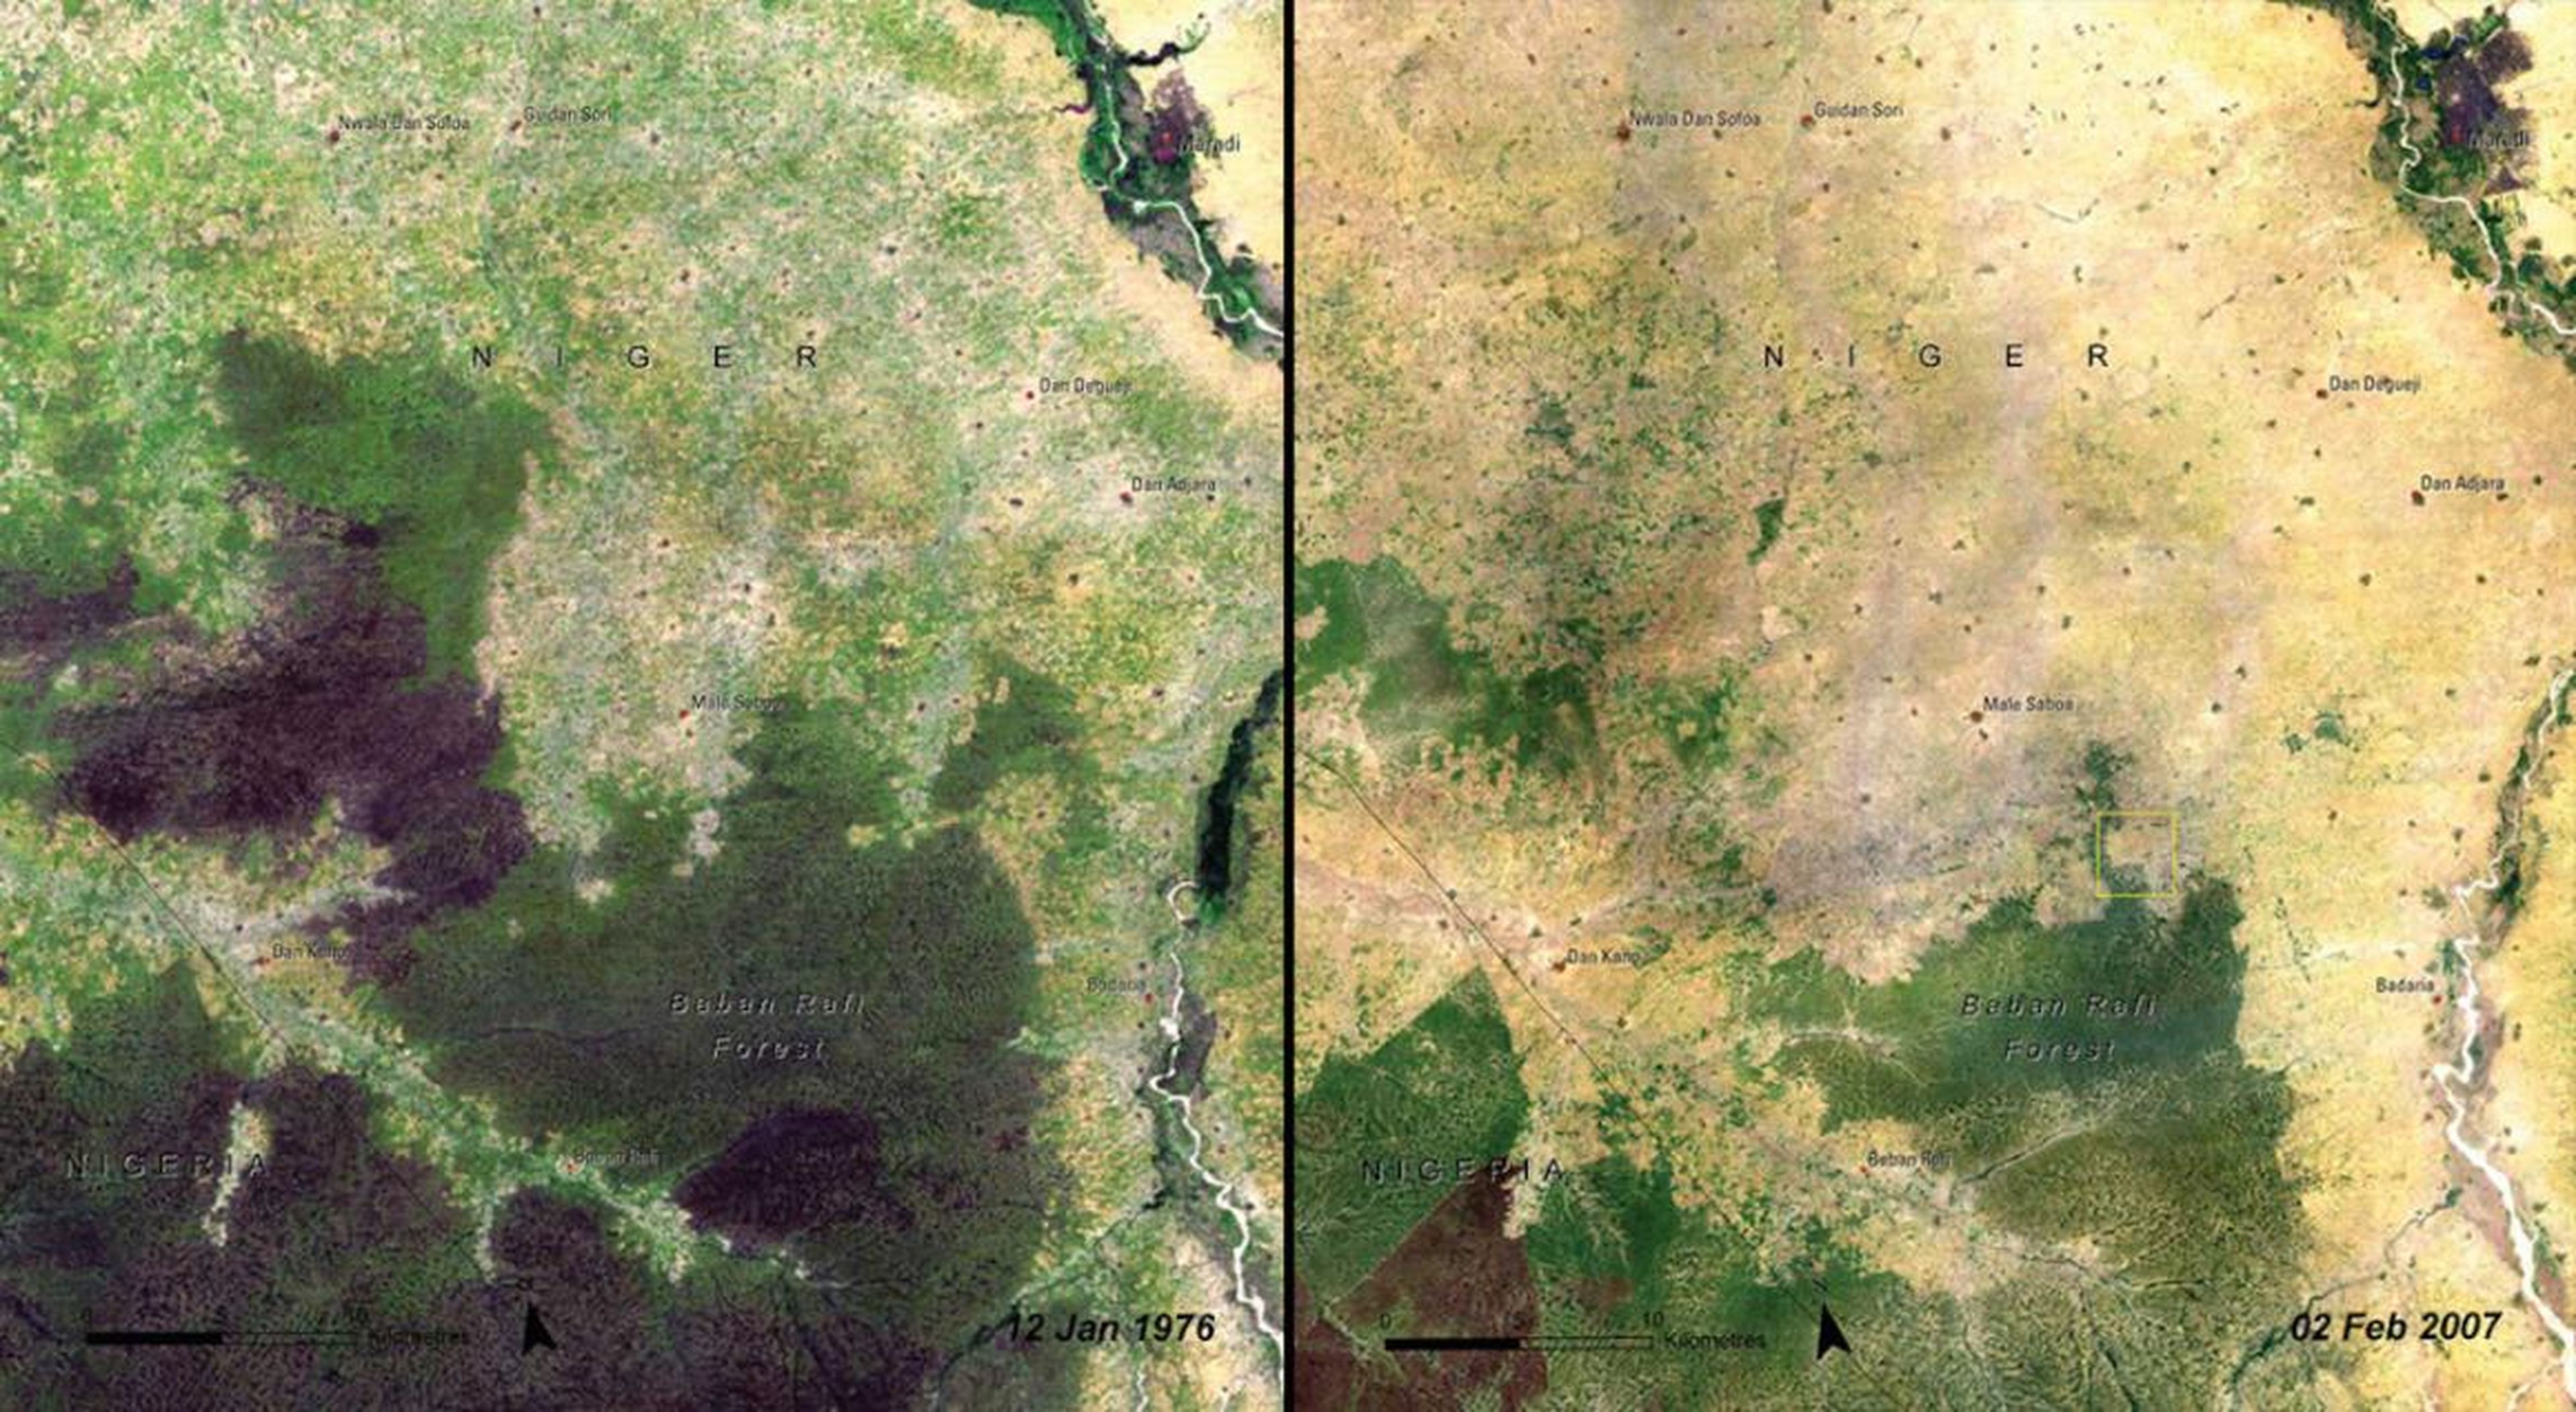 The Baban Rafi Forest in Niger also shrank from 1976 (left) to 2007 (right).